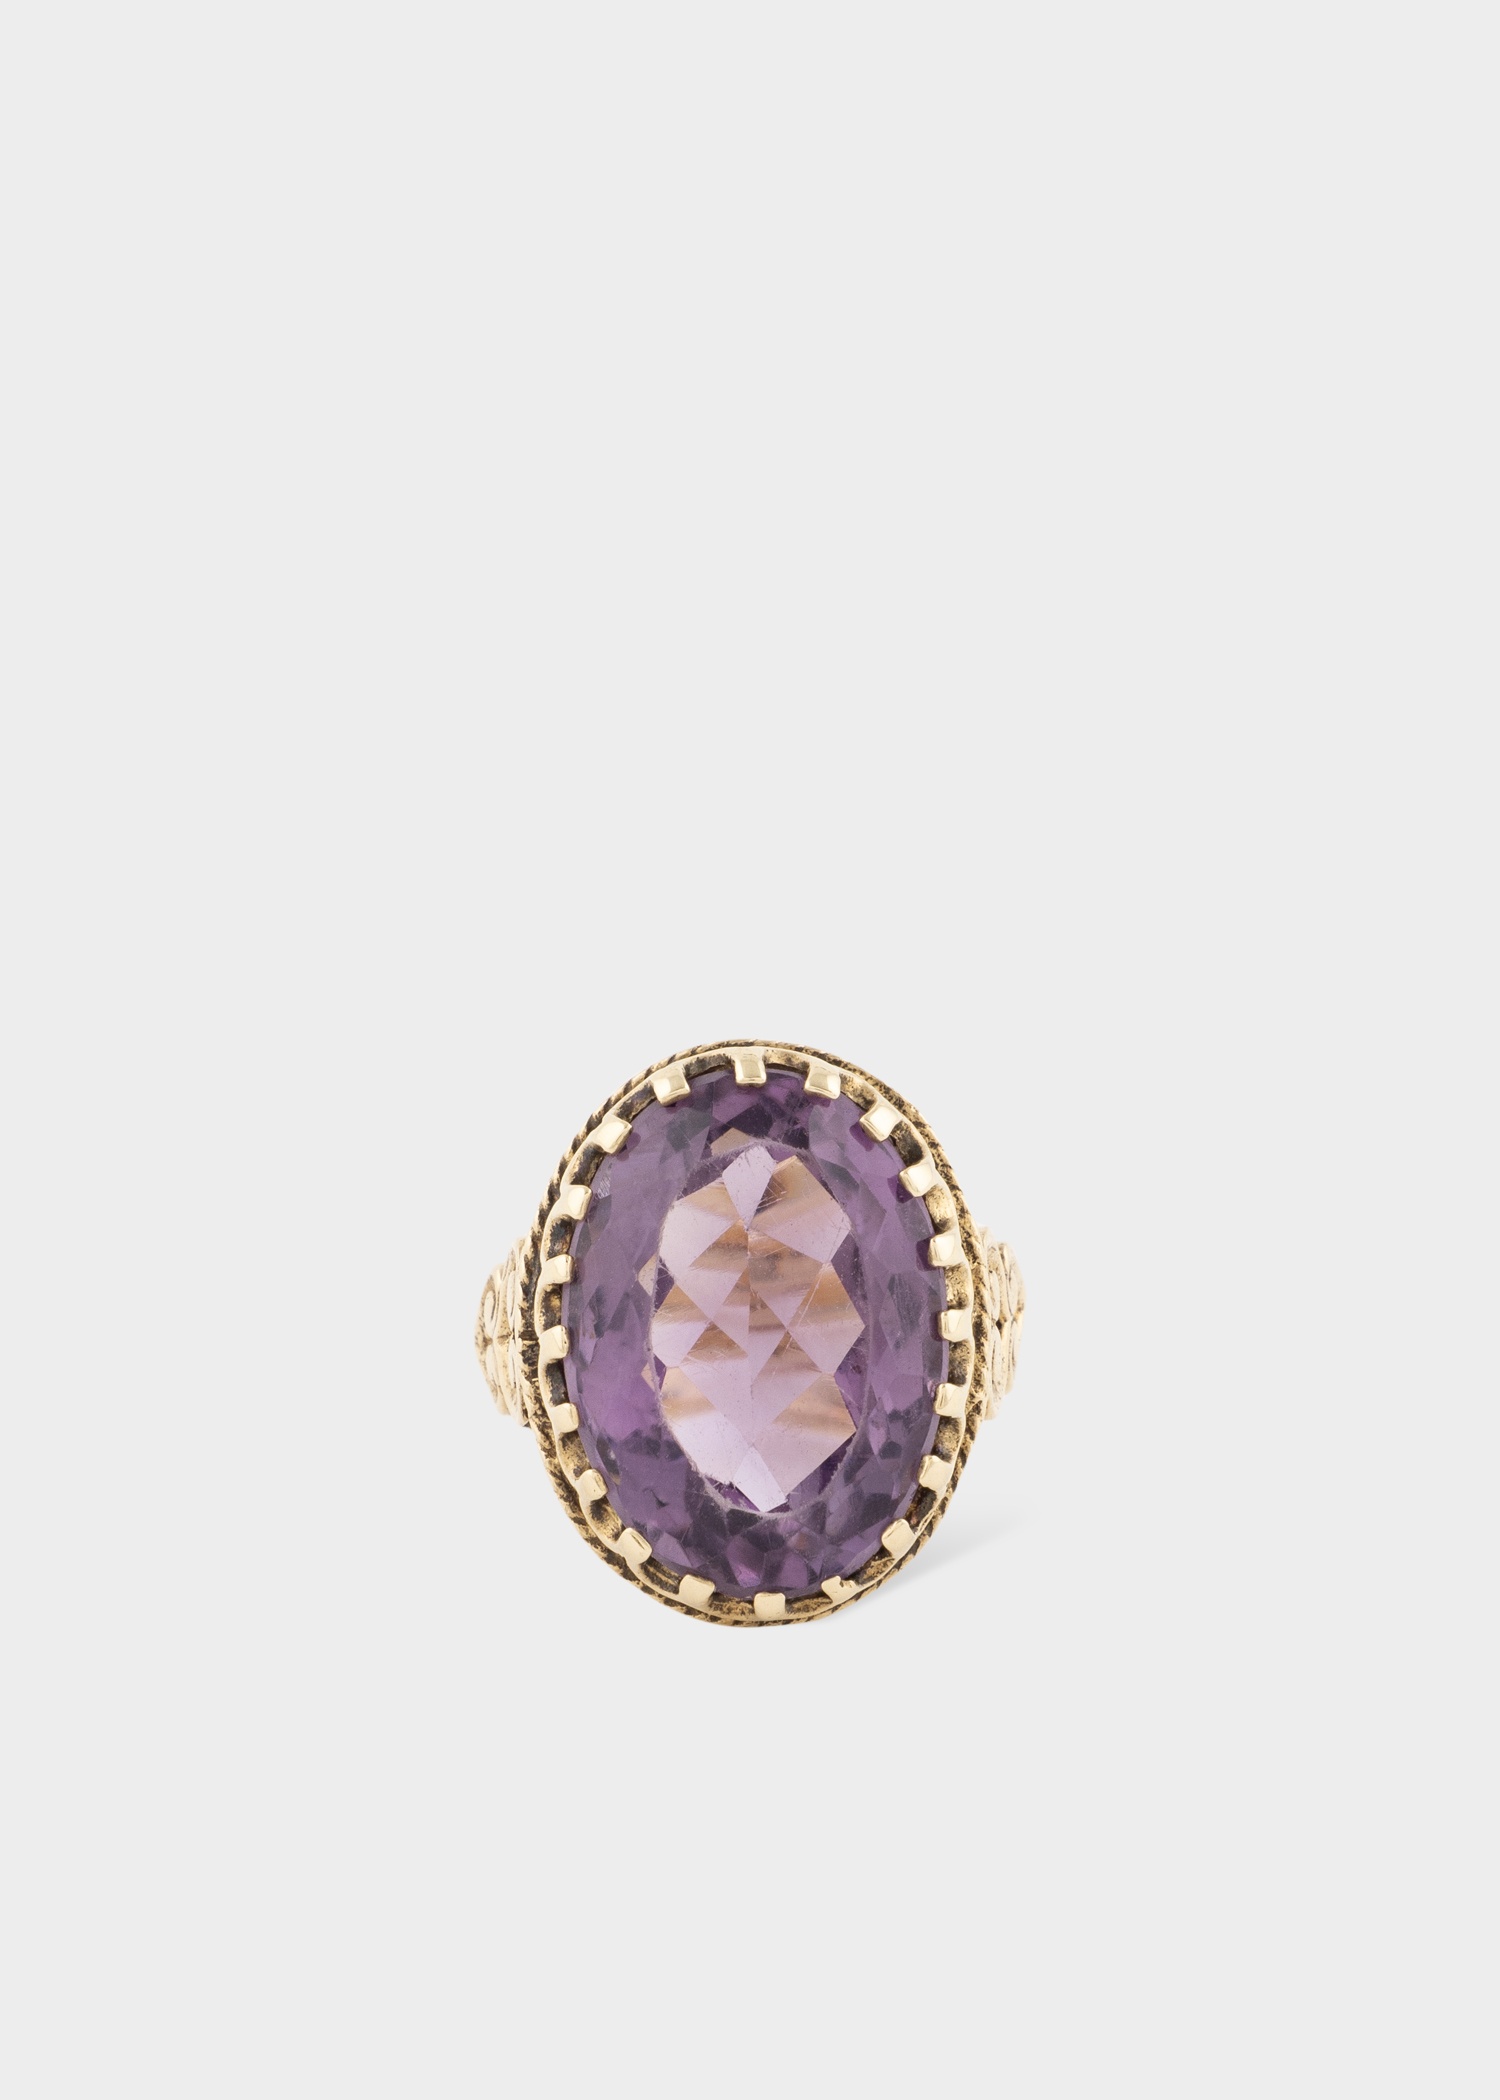 'Enormous Amethyst' Cocktail Ring by Baroque Rocks - 1